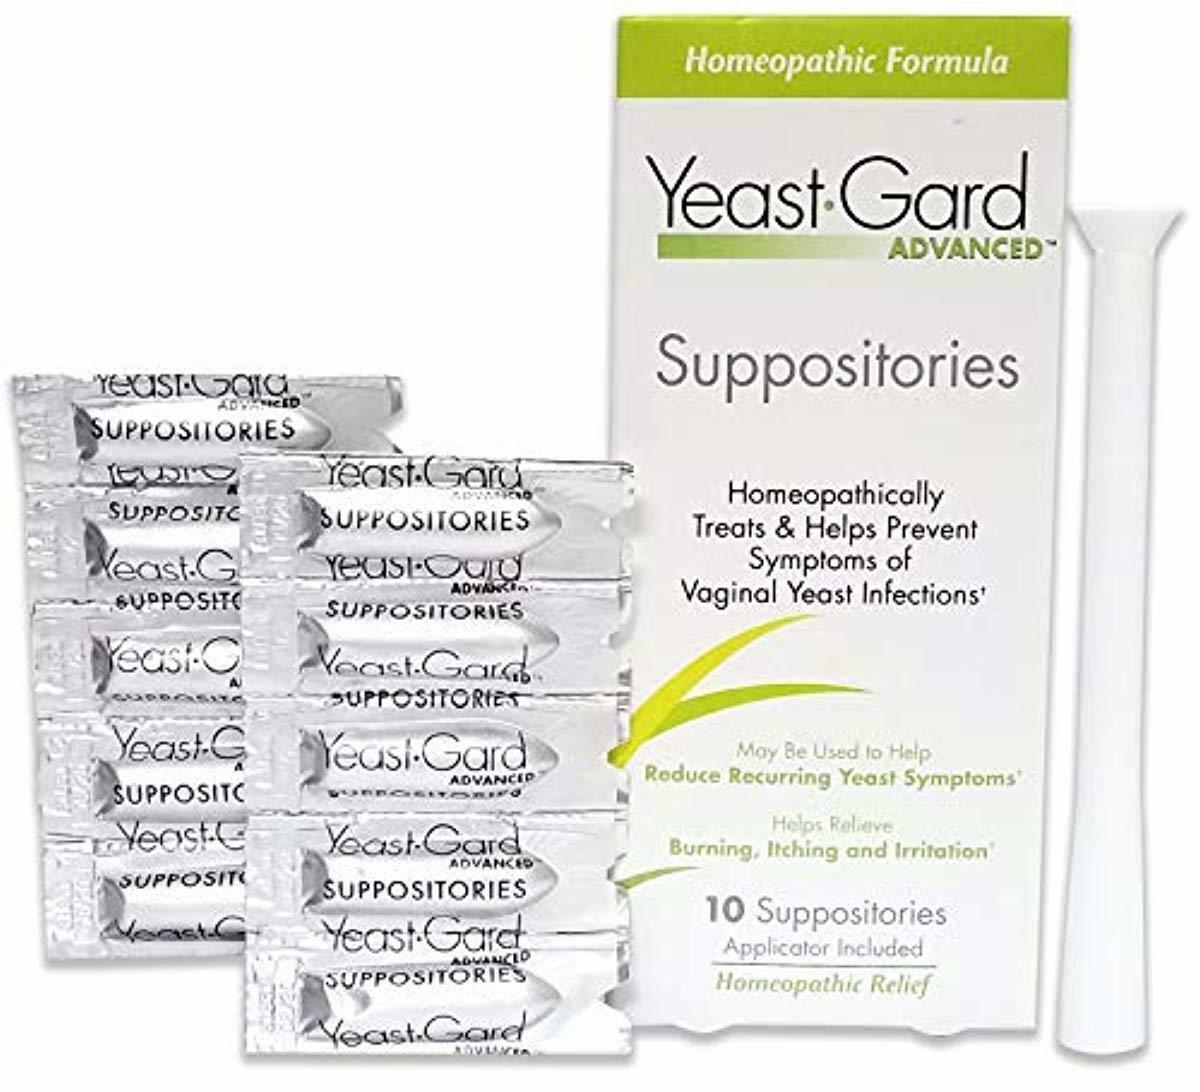 Does Yeast Gard Cure Yeast Infections